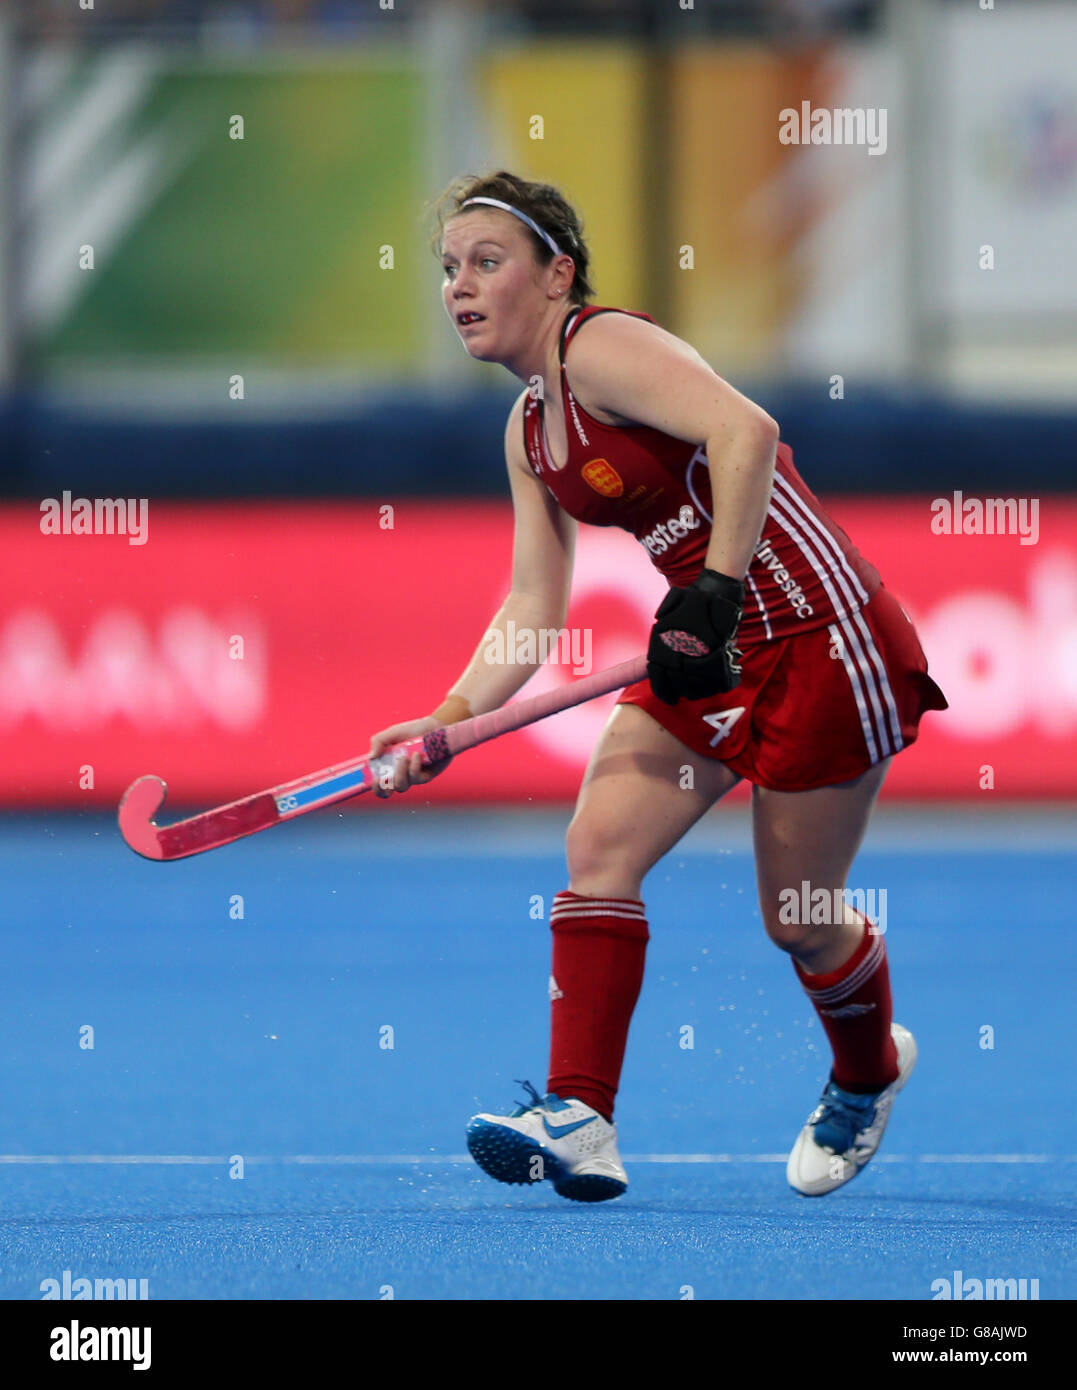 England's Laura Unsworth during the Gold Medal match at the Lee Valley Hockey and Tennis Centre, London. PRESS ASSOCIATION Photo. Picture date: Sunday August 30, 2015. Photo credit should read: Simon Cooper/PA Wire Stock Photo